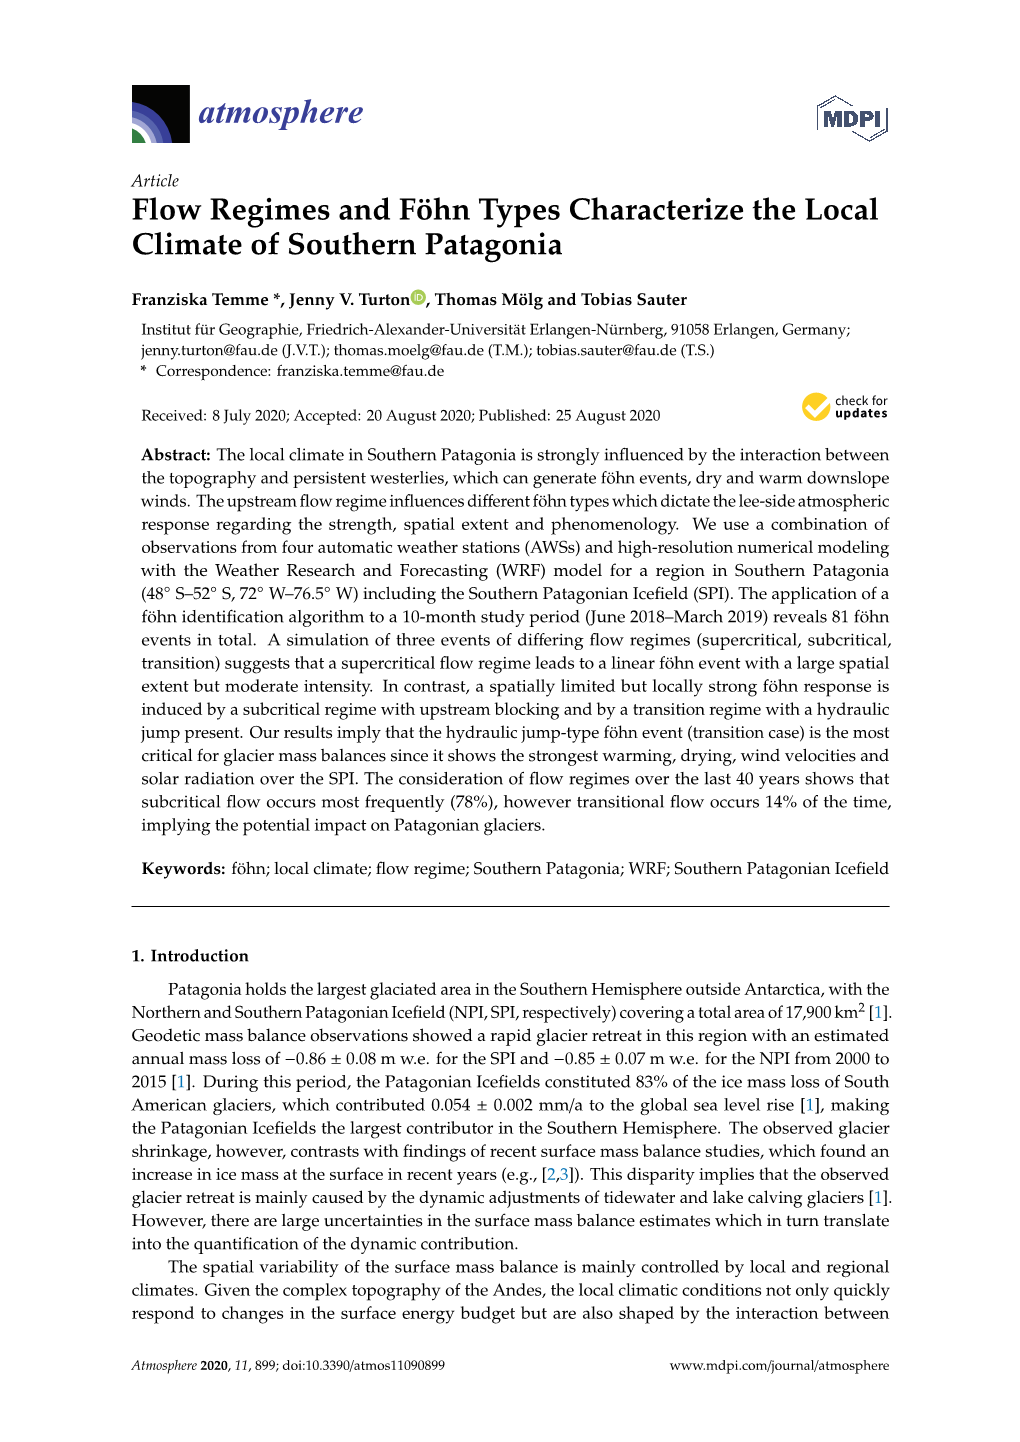 Flow Regimes and Föhn Types Characterize the Local Climate of Southern Patagonia